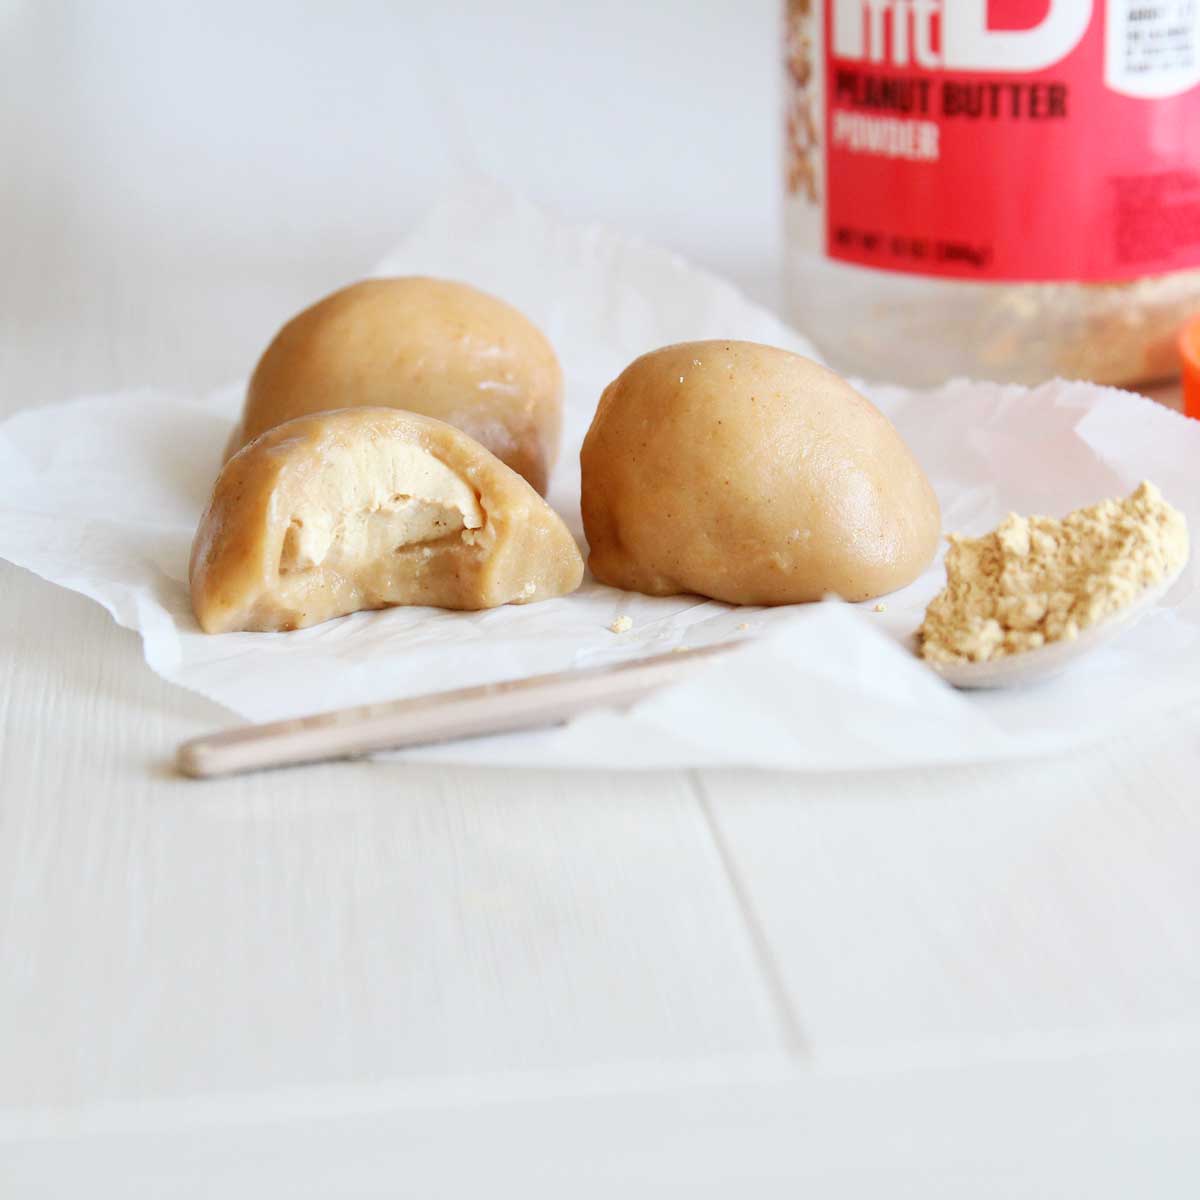 Low Calorie Pb Fit Mochi made with Peanut Butter Powder - Peanut Butter Glaze